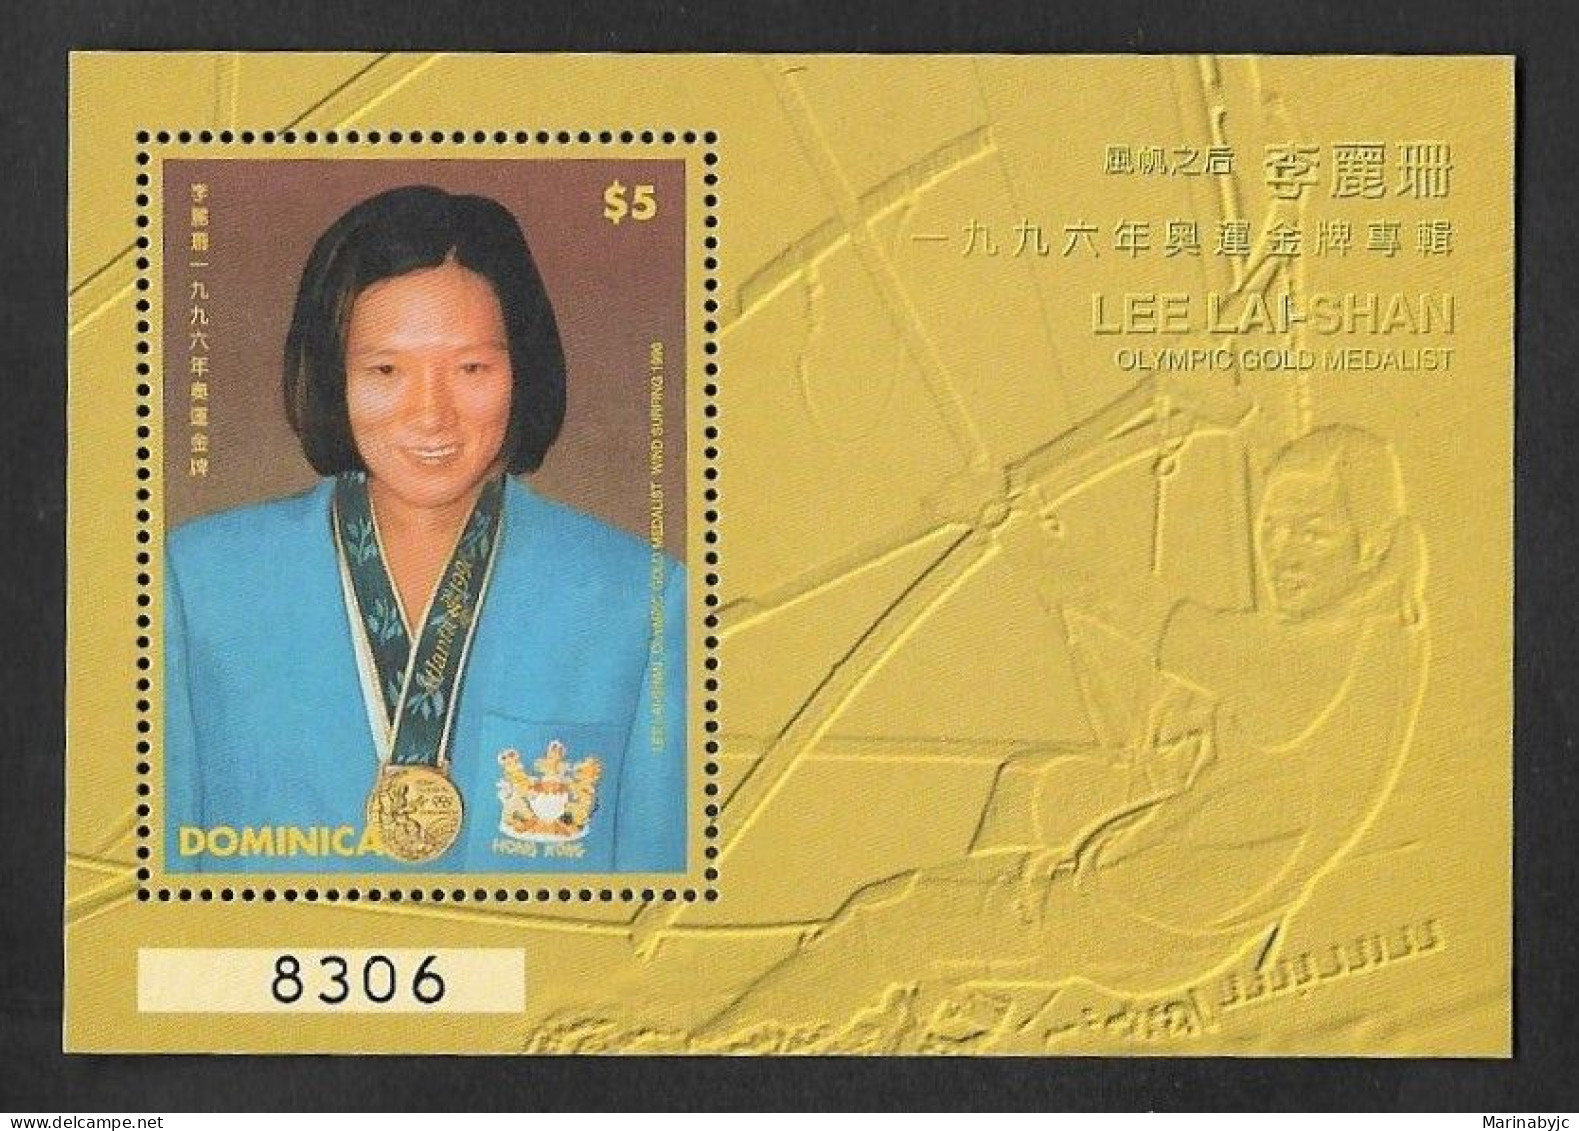 SE)1997 DOMINICA, FROM THE SPORTS SERIES, ATLANTA 96' OLYMPIC GAMES, TRIBUTE TO LEE LAI-SHAN, GOLD MEDALIST, SS, MNH - Dominique (1978-...)